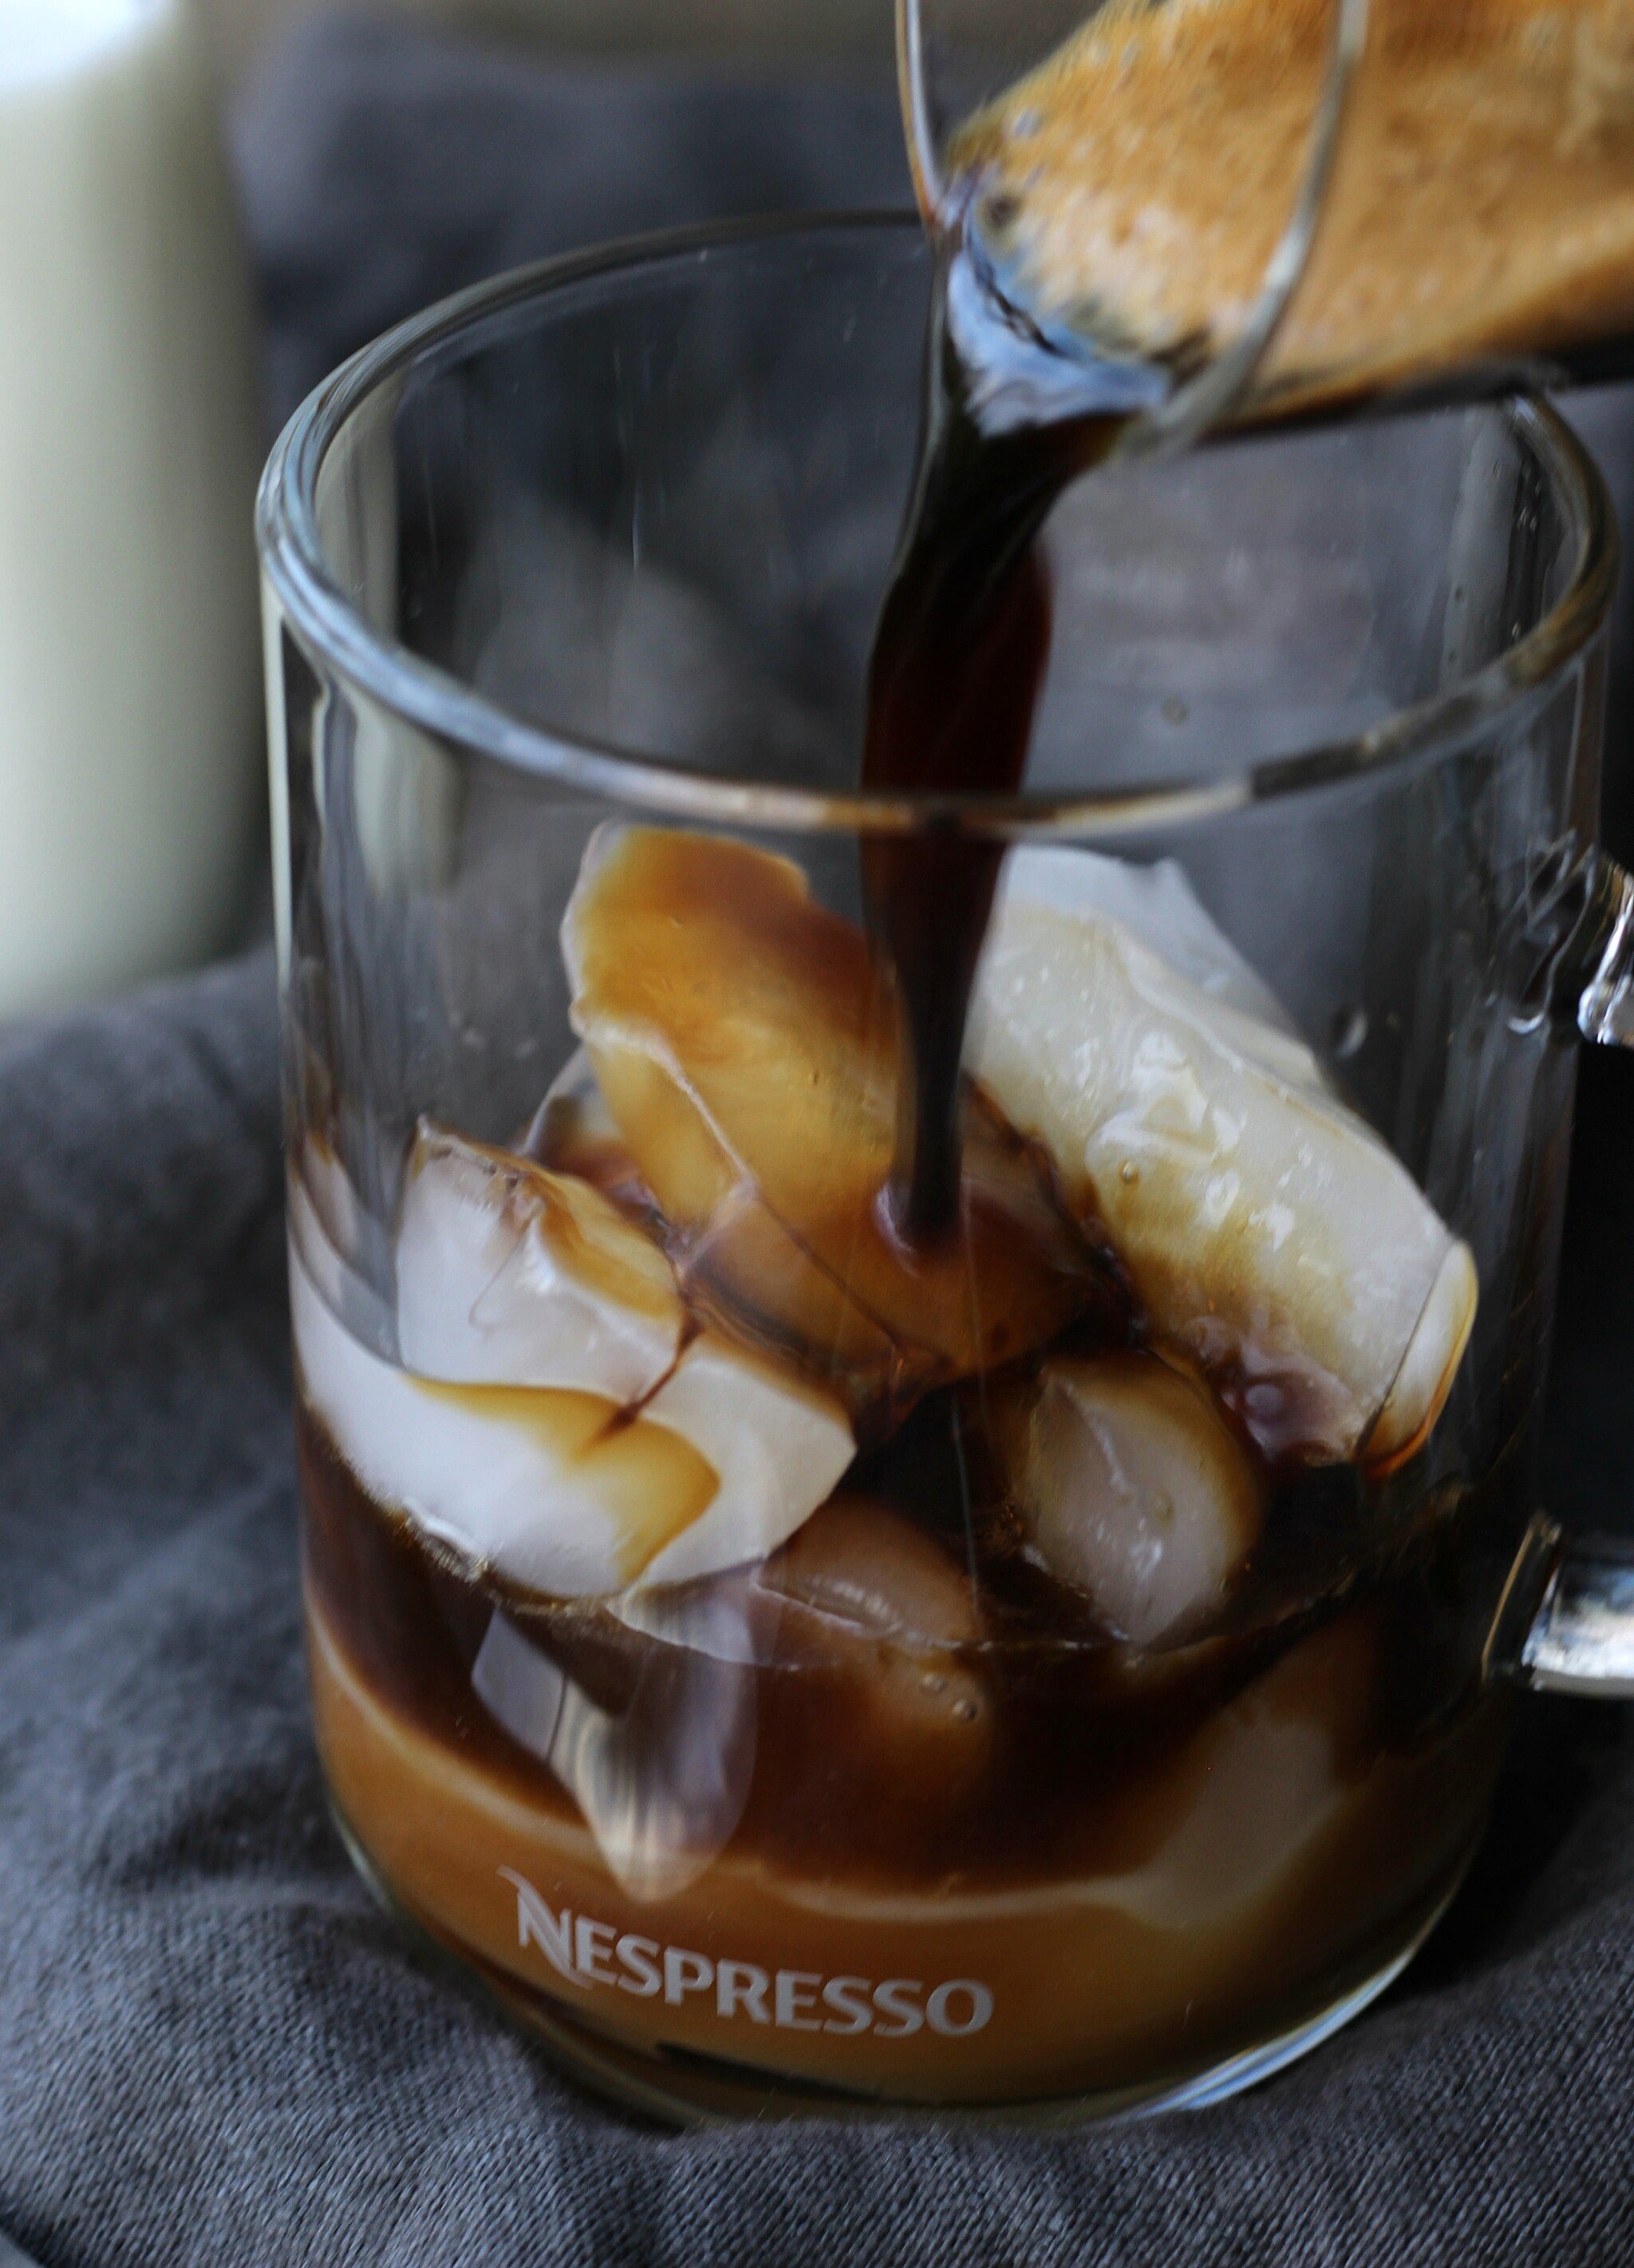 Espresso poured in a clear glass cup of caramel and ice cubes